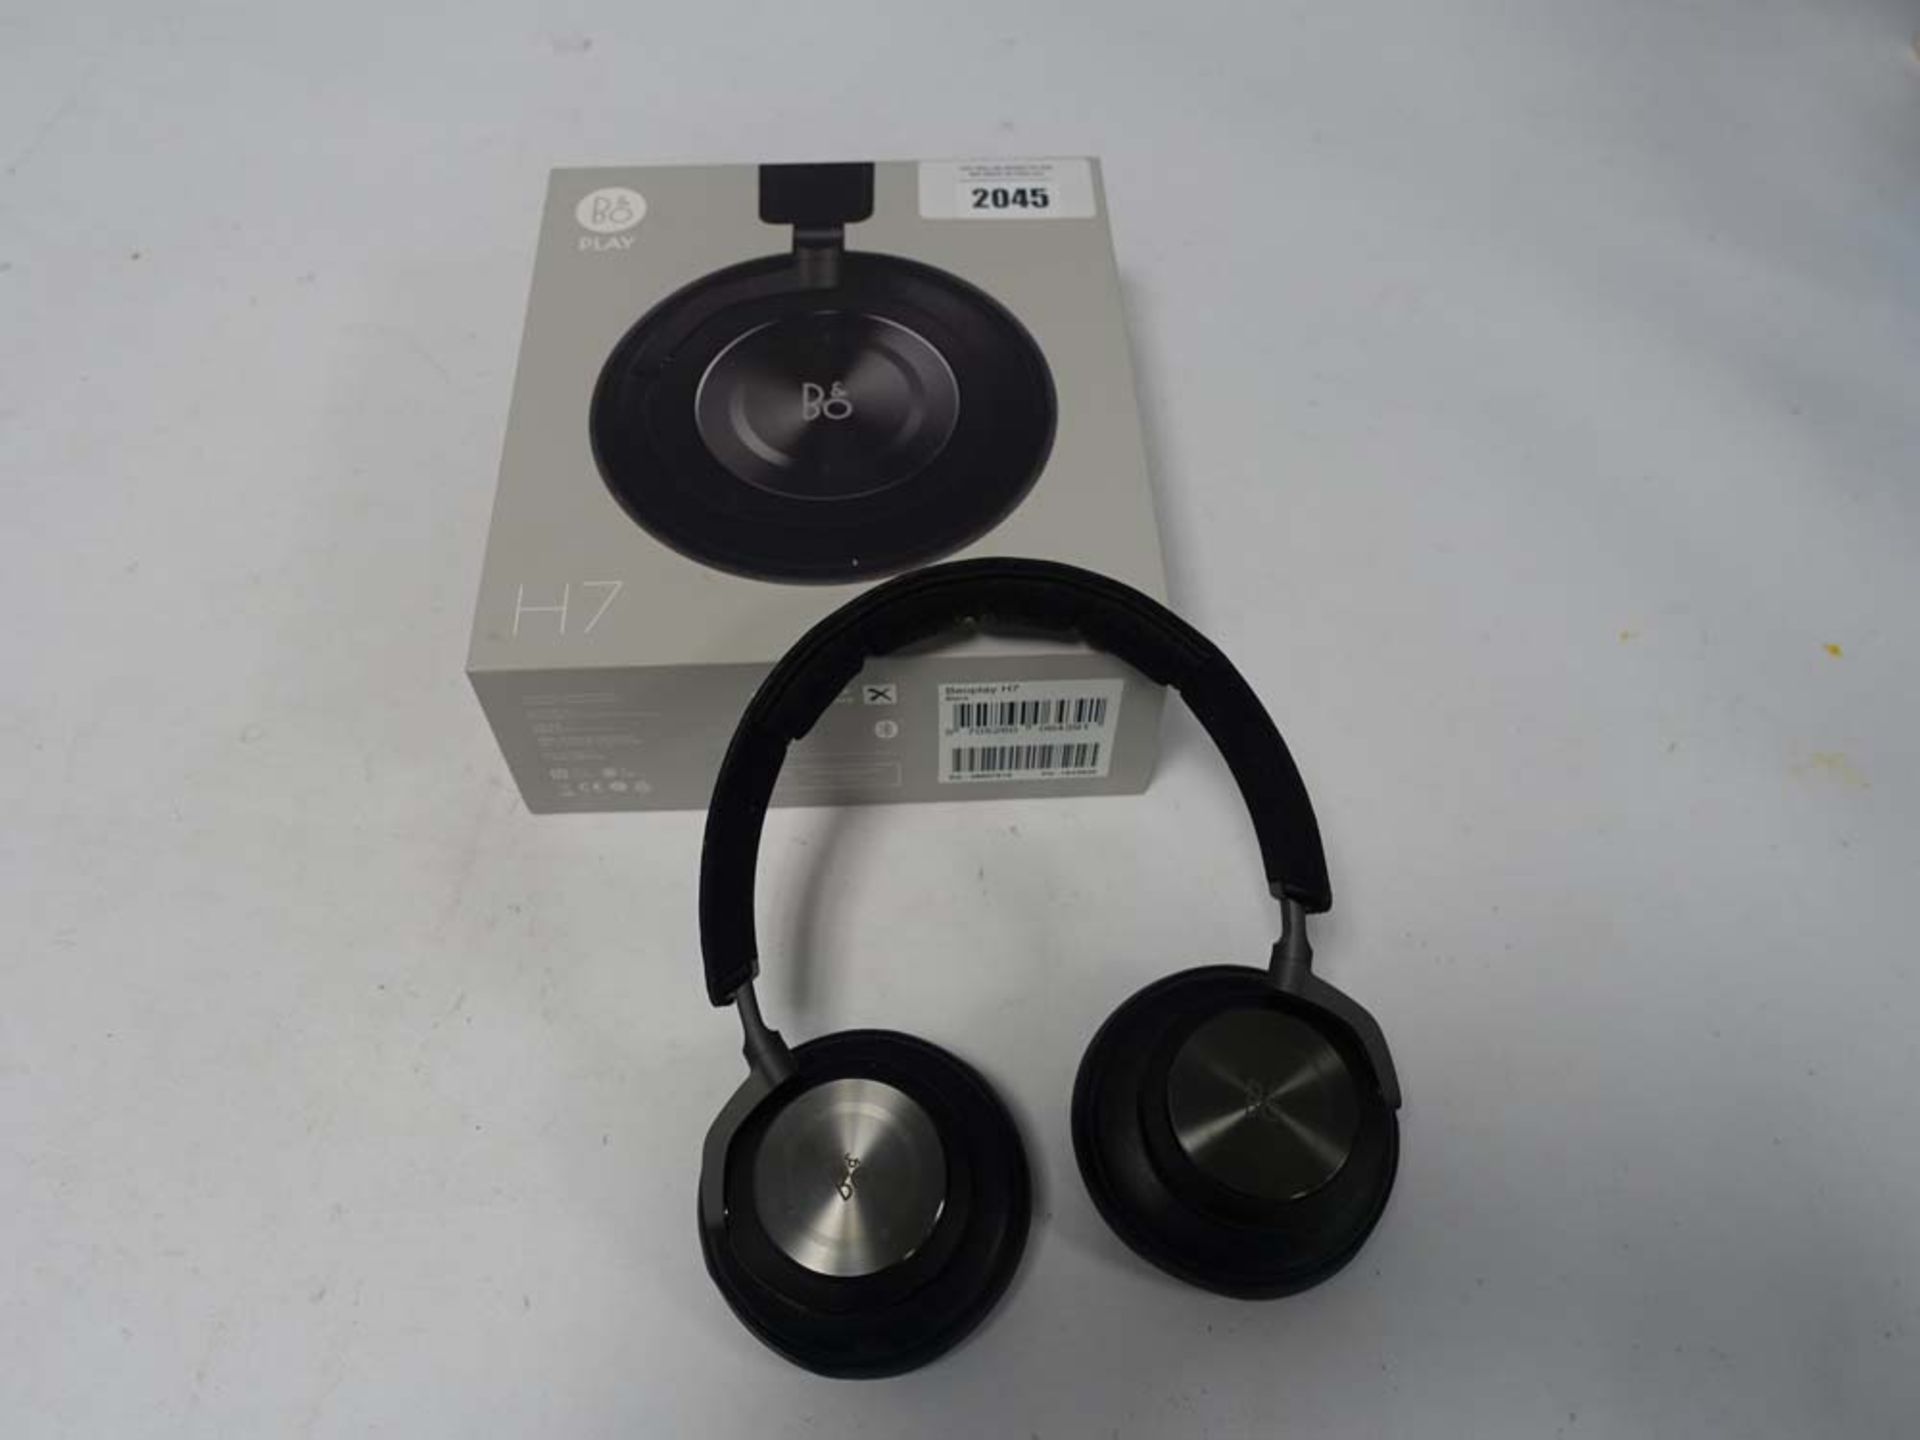 Bang & Olufsen H7 headphones with charging cable and box. ( no battery)